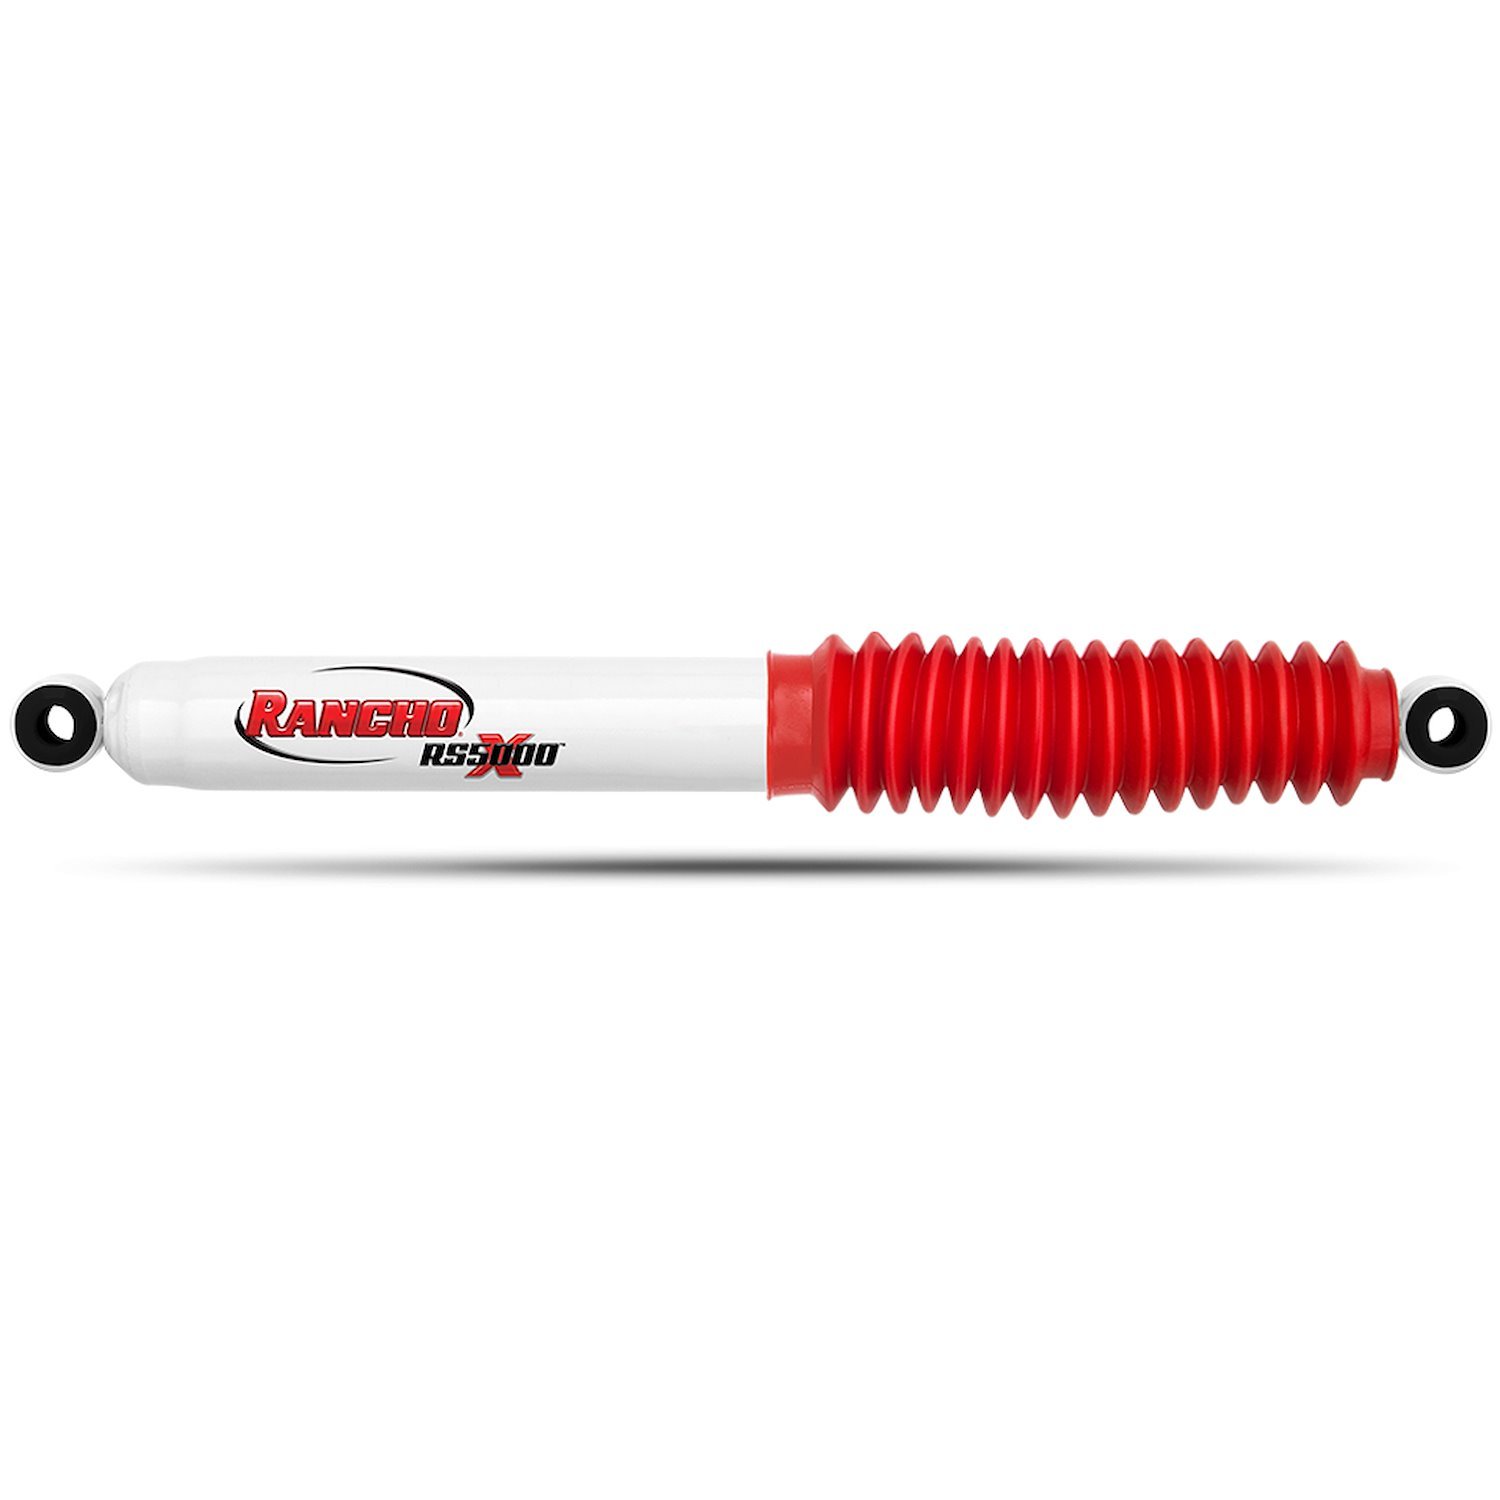 RS5000X Rear Shock Absorber for 1976-1993 Dodge W-Series